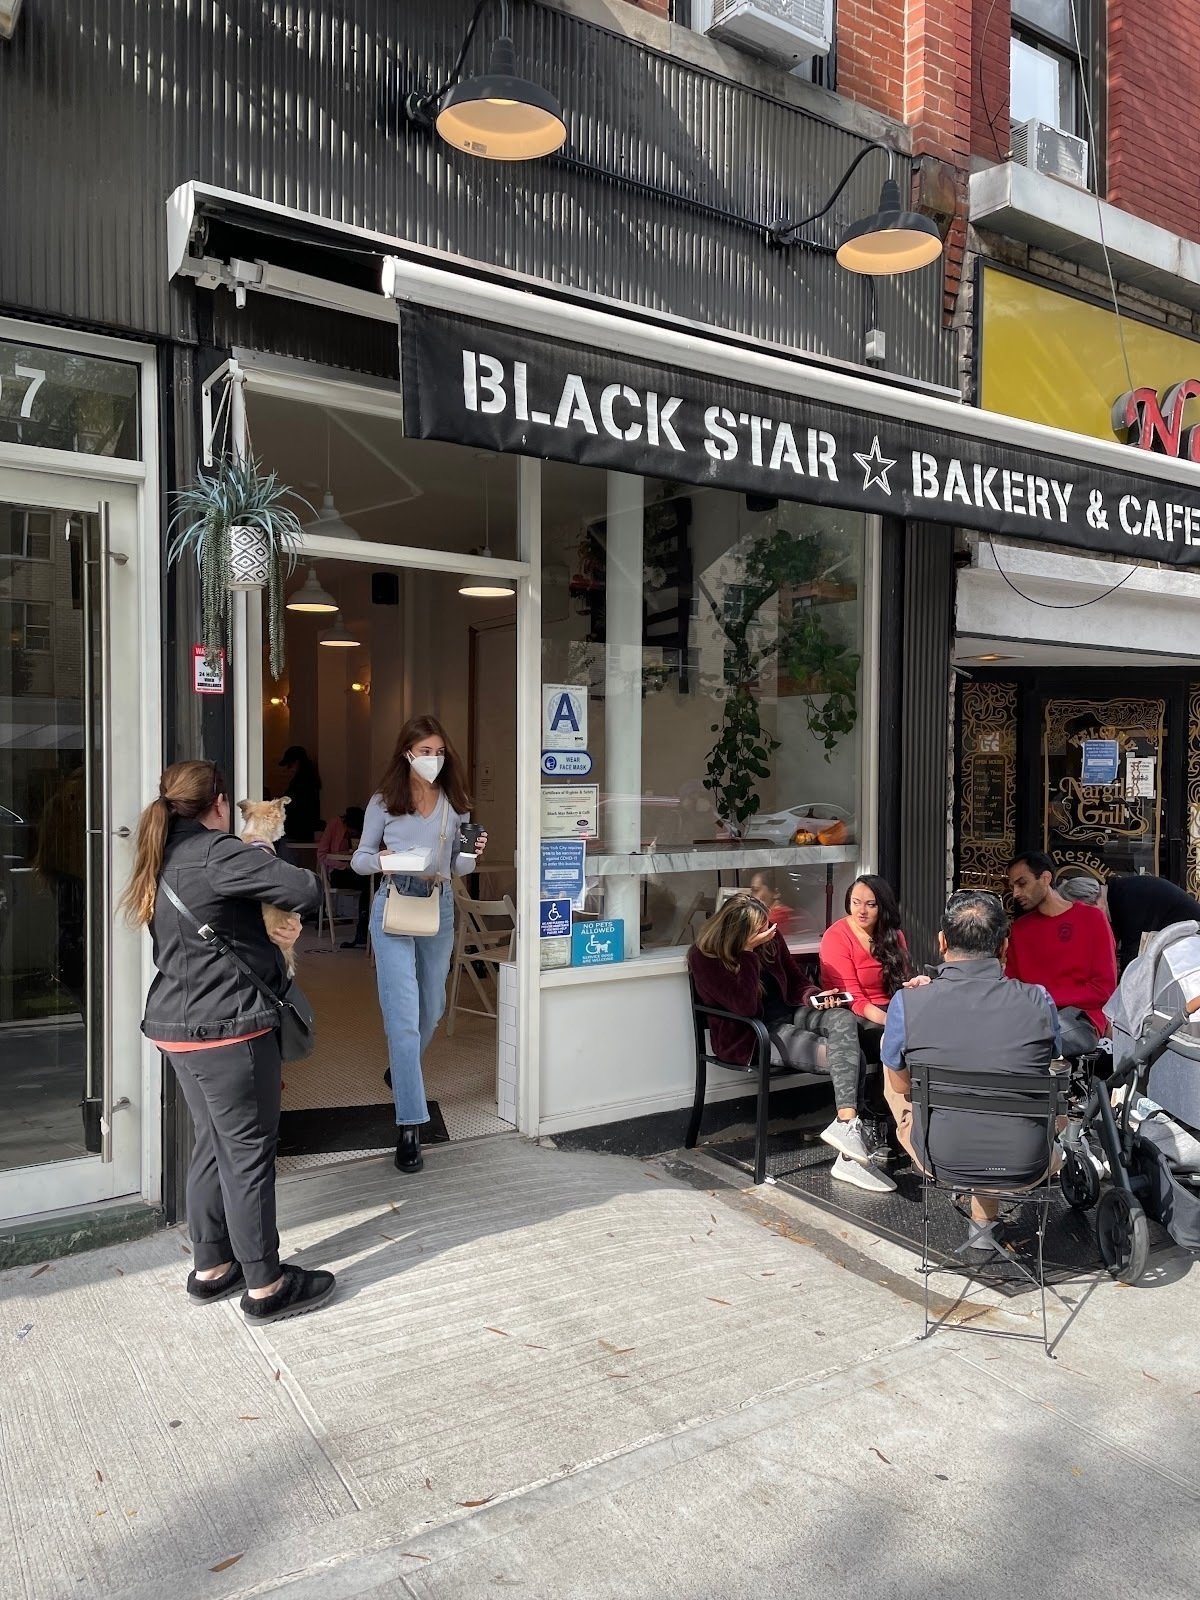 <span class="translation_missing" title="translation missing: en.meta.location_title, location_name: Black Star Bakery &amp; Cafe, city: New York">Location Title</span>